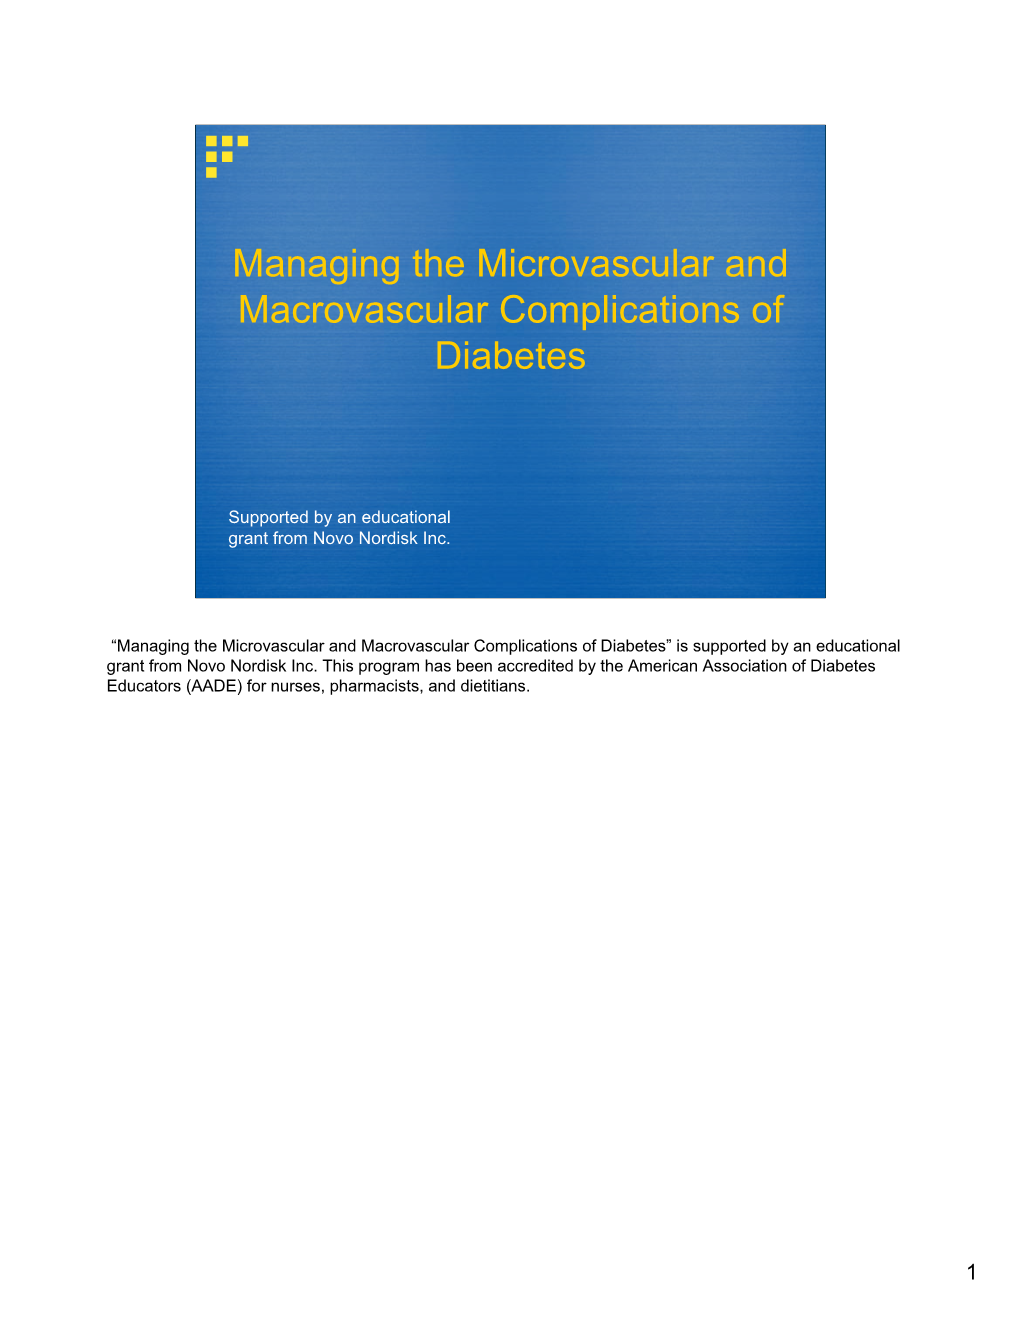 Managing the Microvascular and Macrovascular Complications of Diabetes